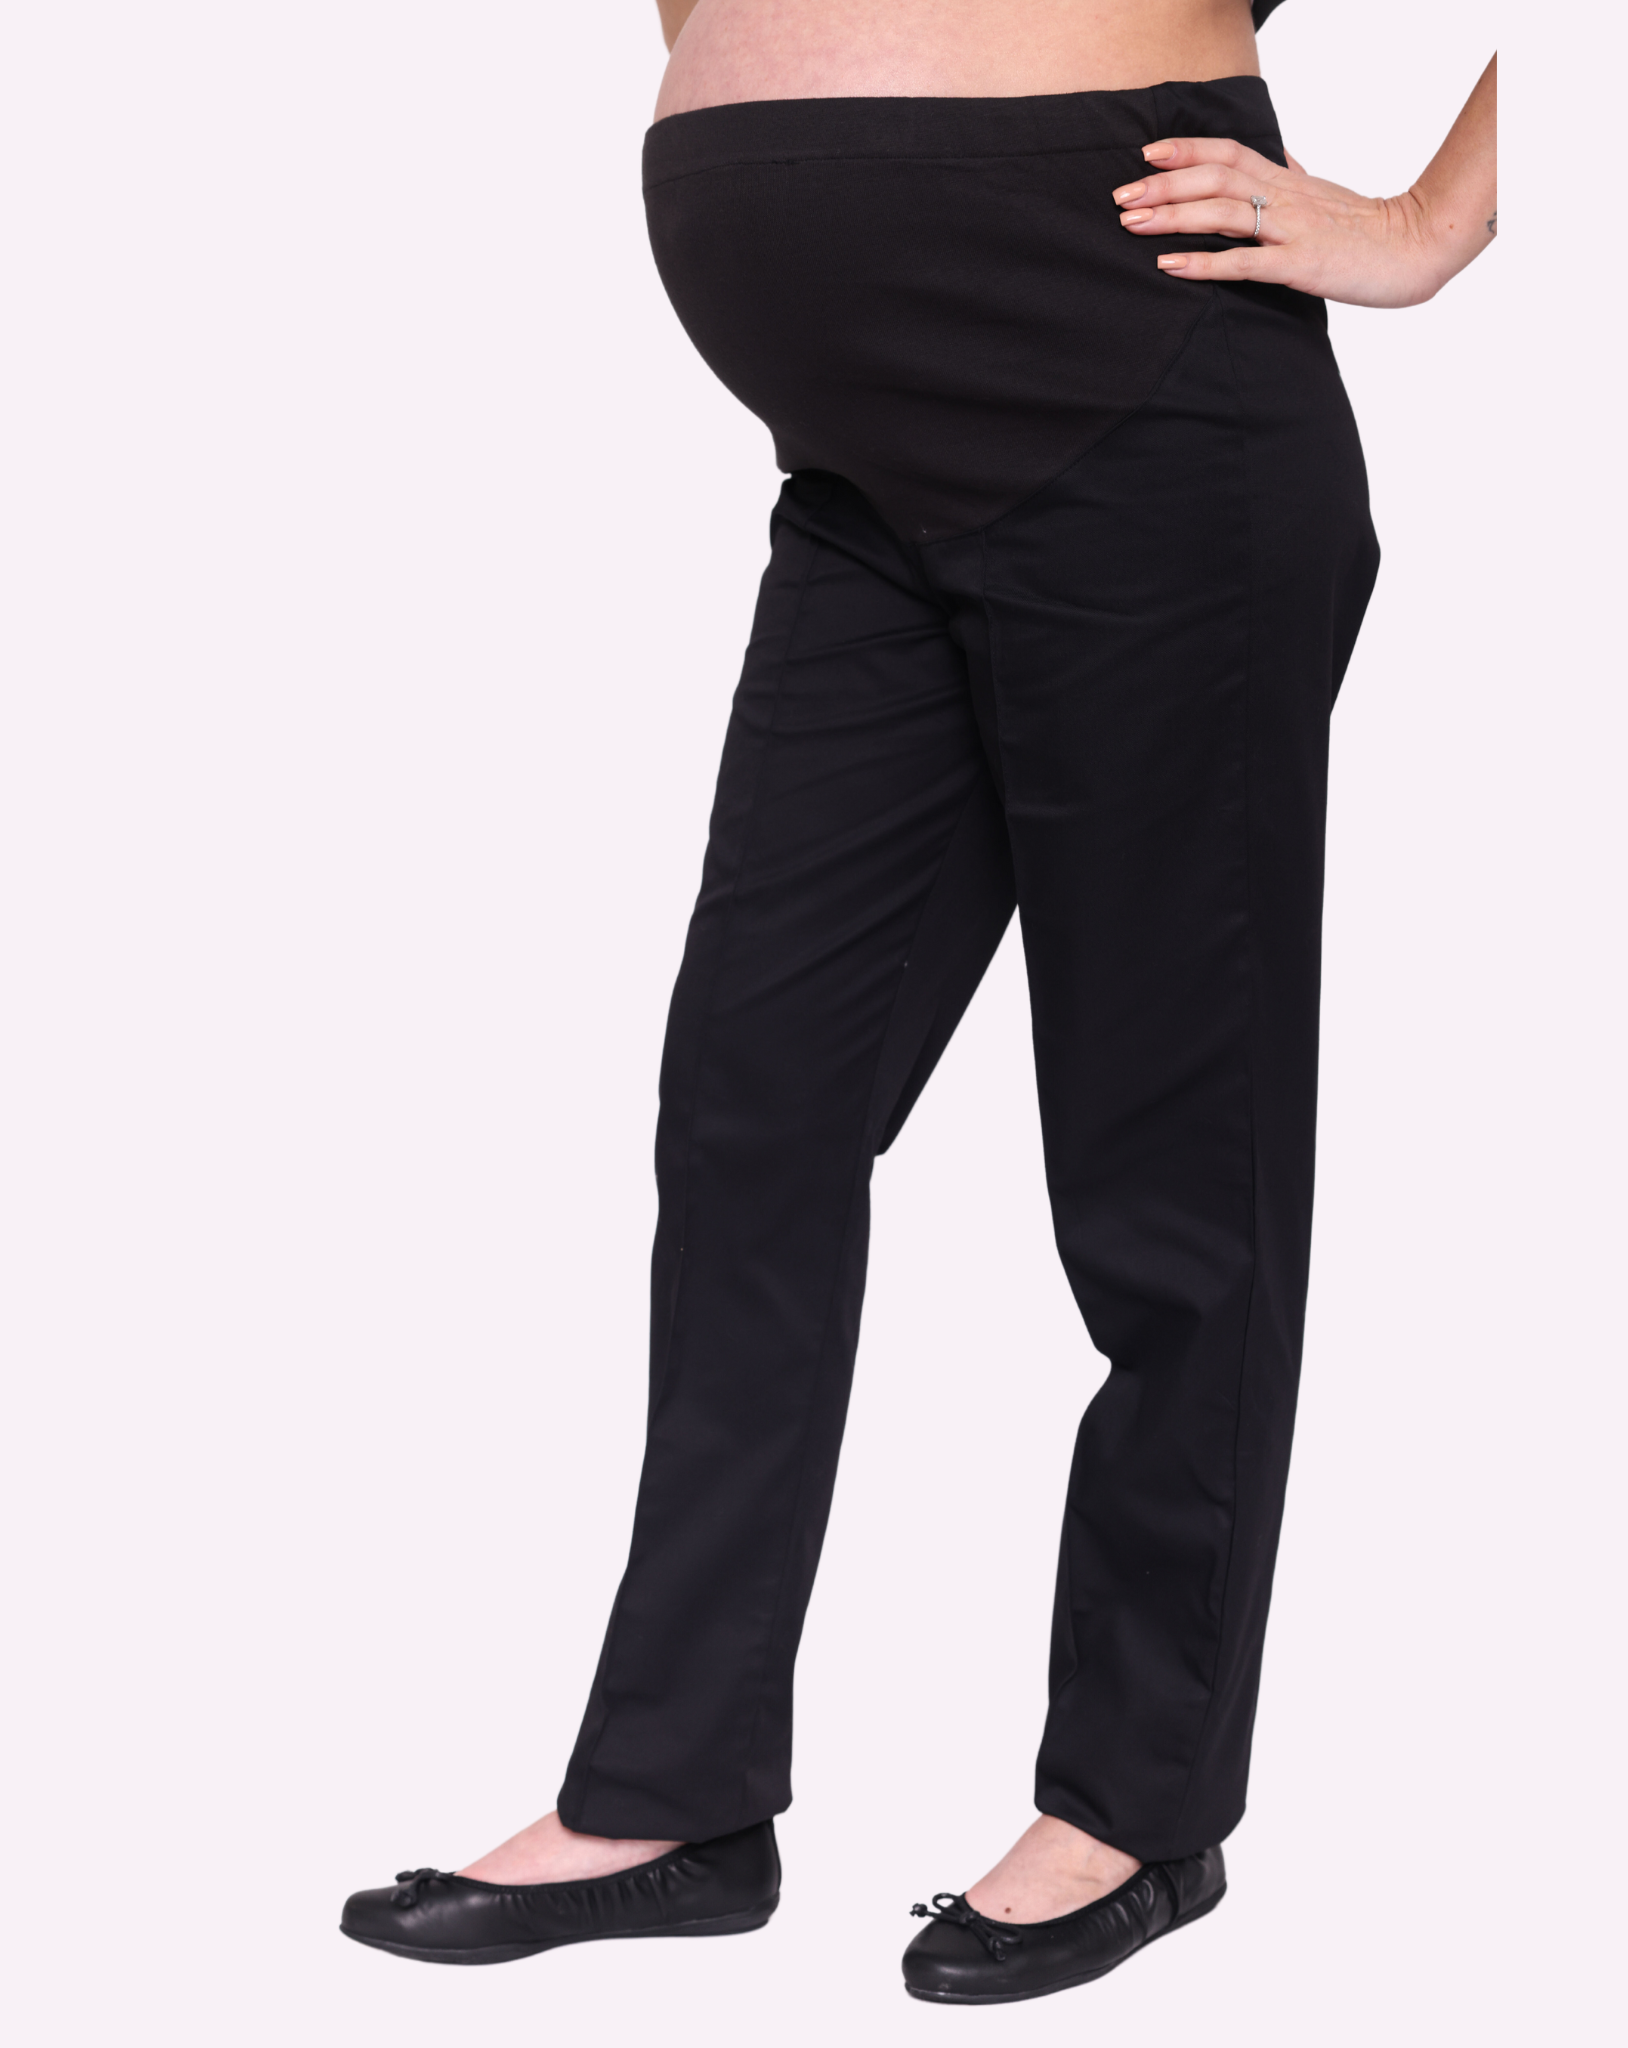 Ladies Maternity Trousers with Elastic Waistband – Uniforms4Healthcare